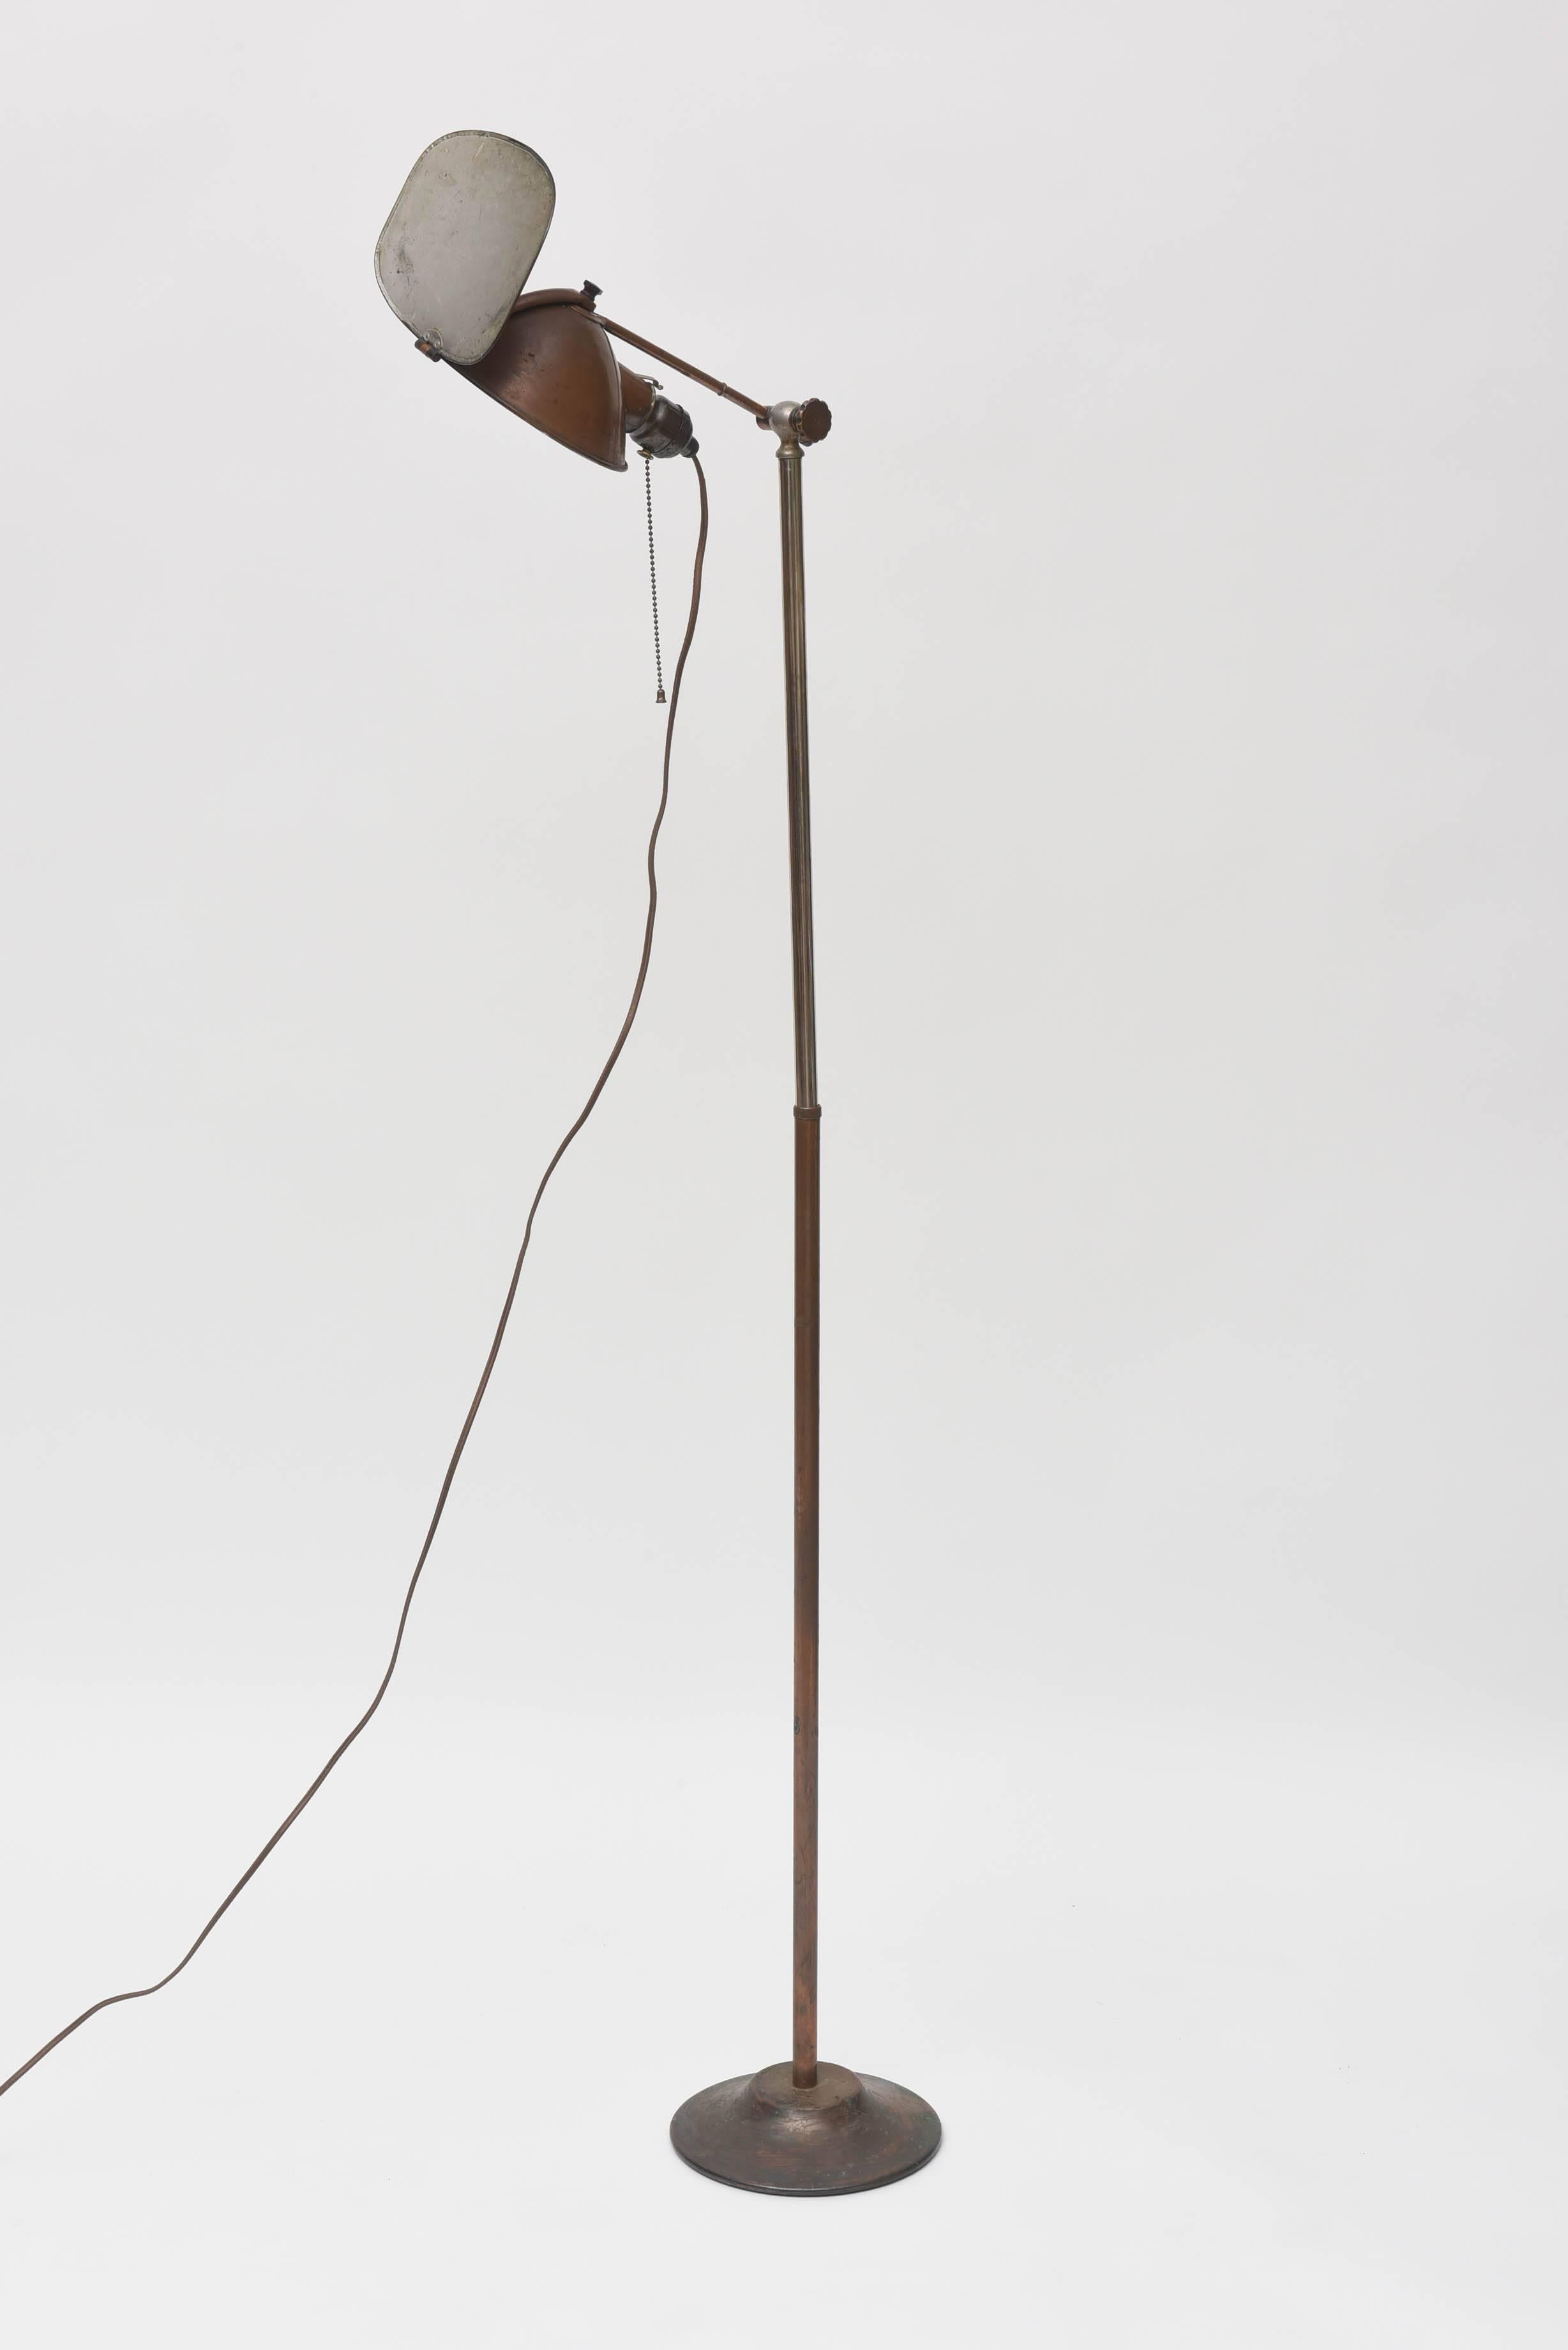 Early 20th Century Early Copper Floor Lamp by Lyhne Lamp Company